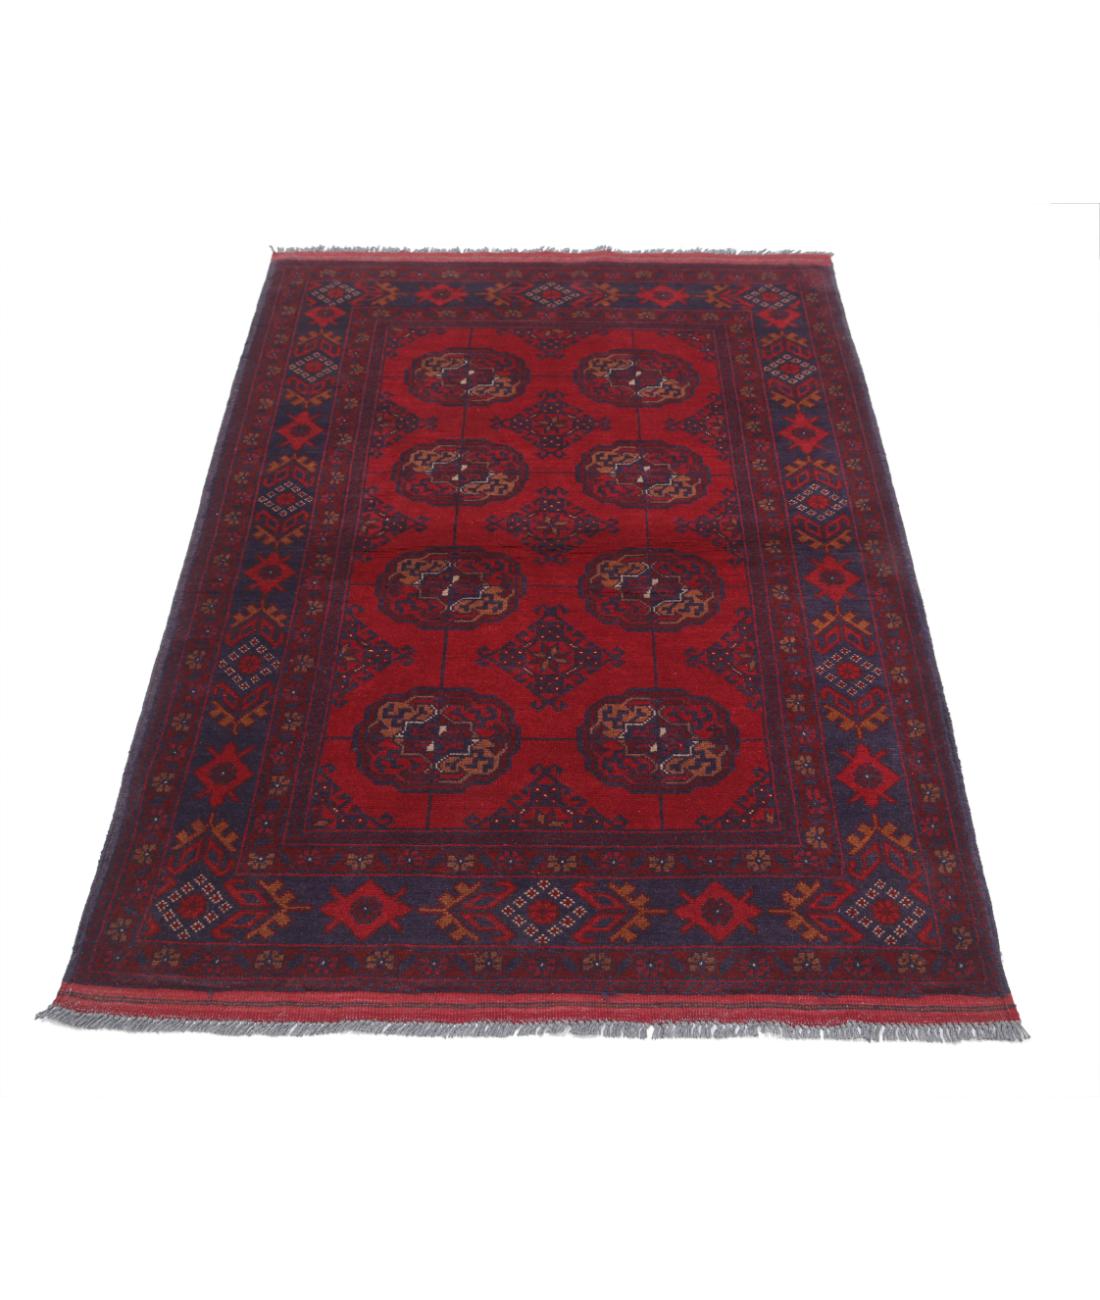 Afghan 3' 6" X 5' 0" Hand-Knotted Wool Rug 3' 6" X 5' 0" (107 X 152) / Red / Blue